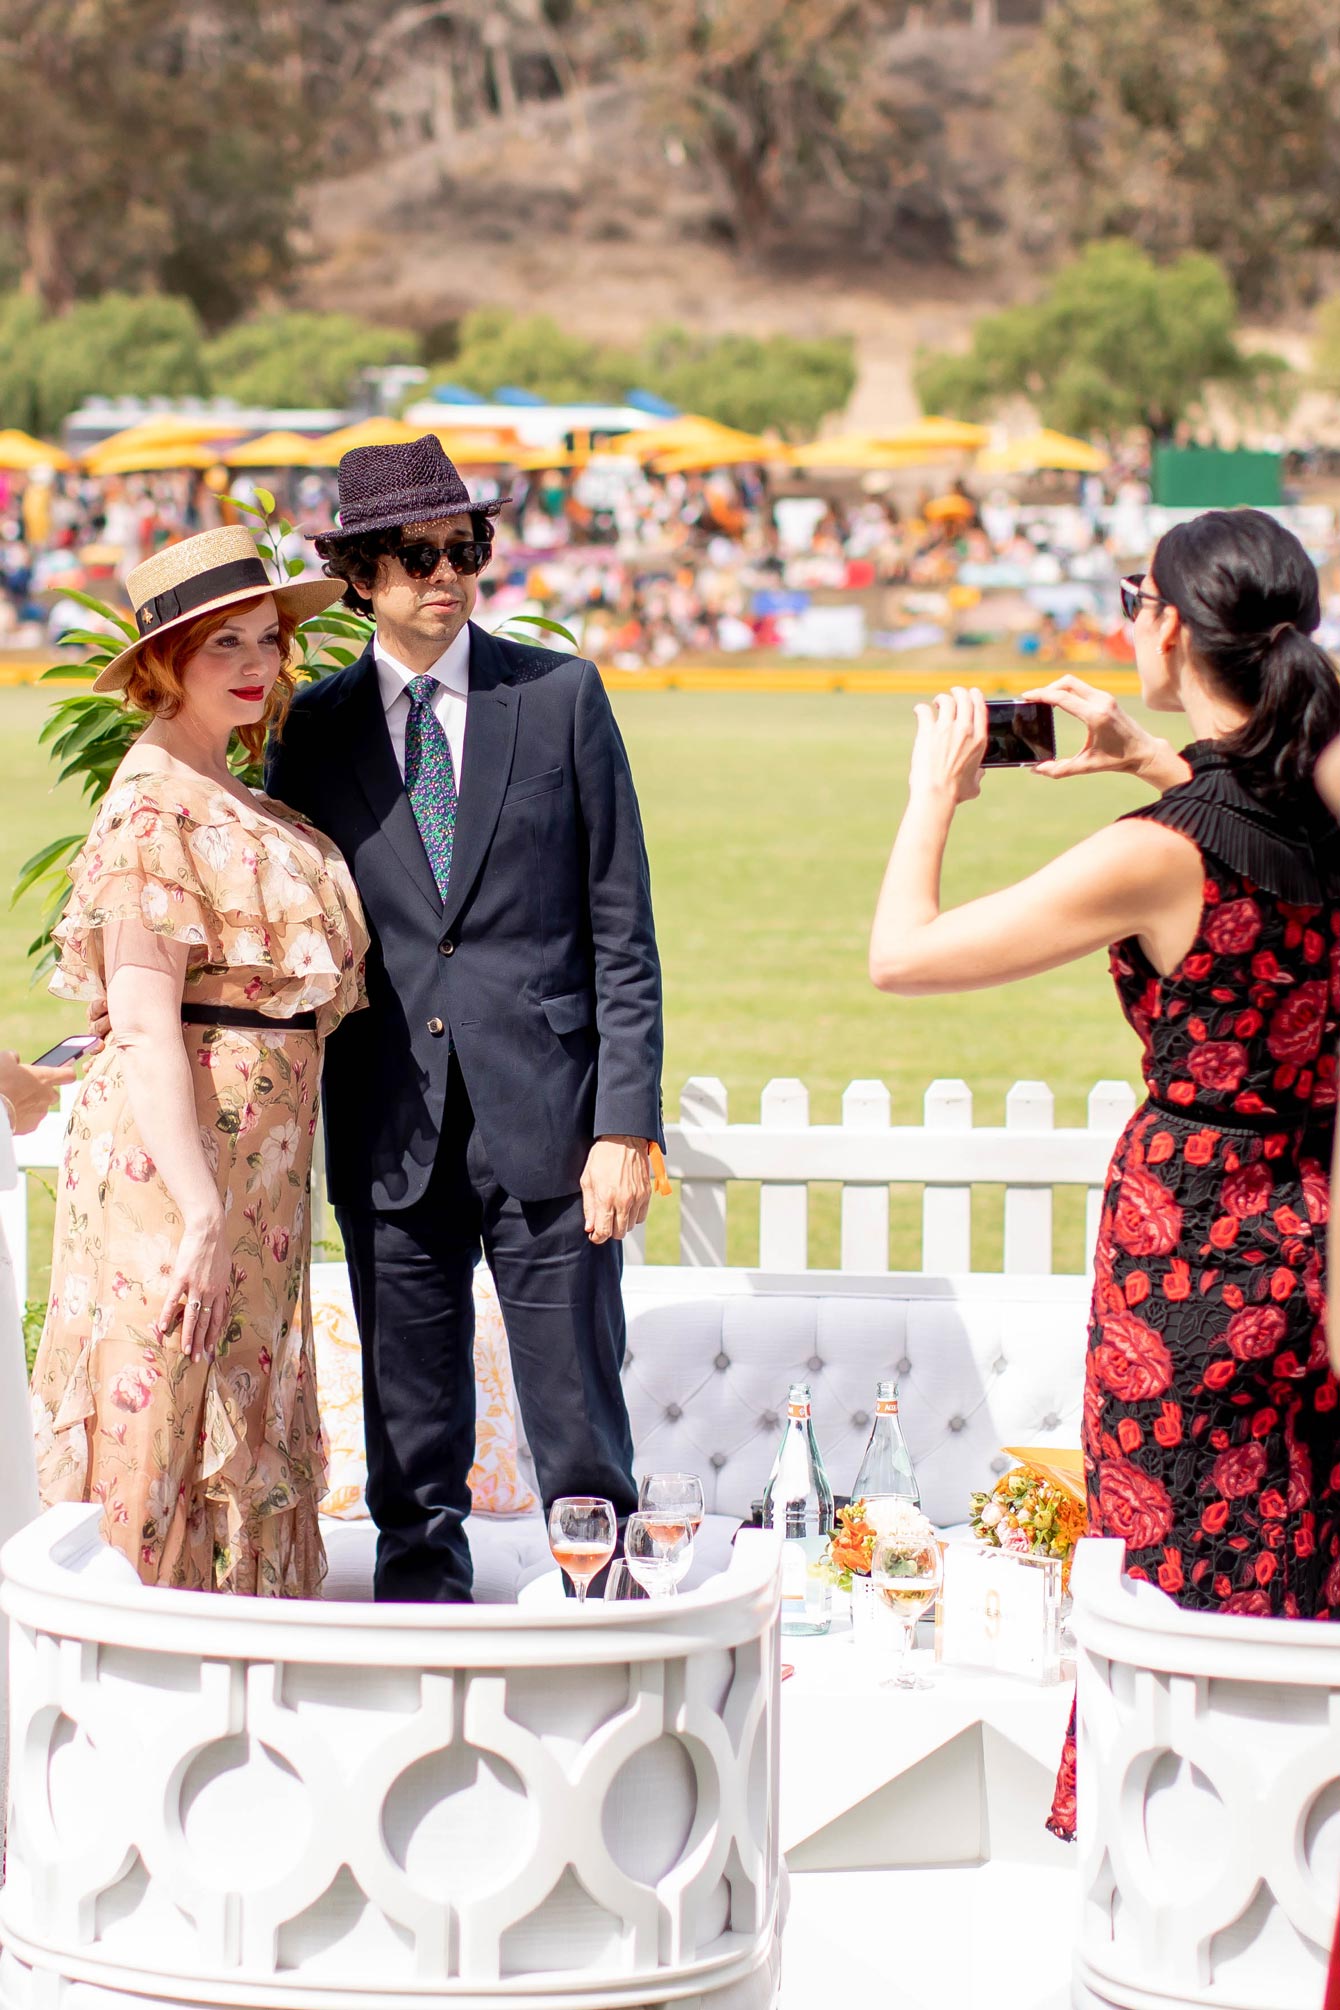 2019 Veuve Clicquot Polo Classic A Guide to the Event